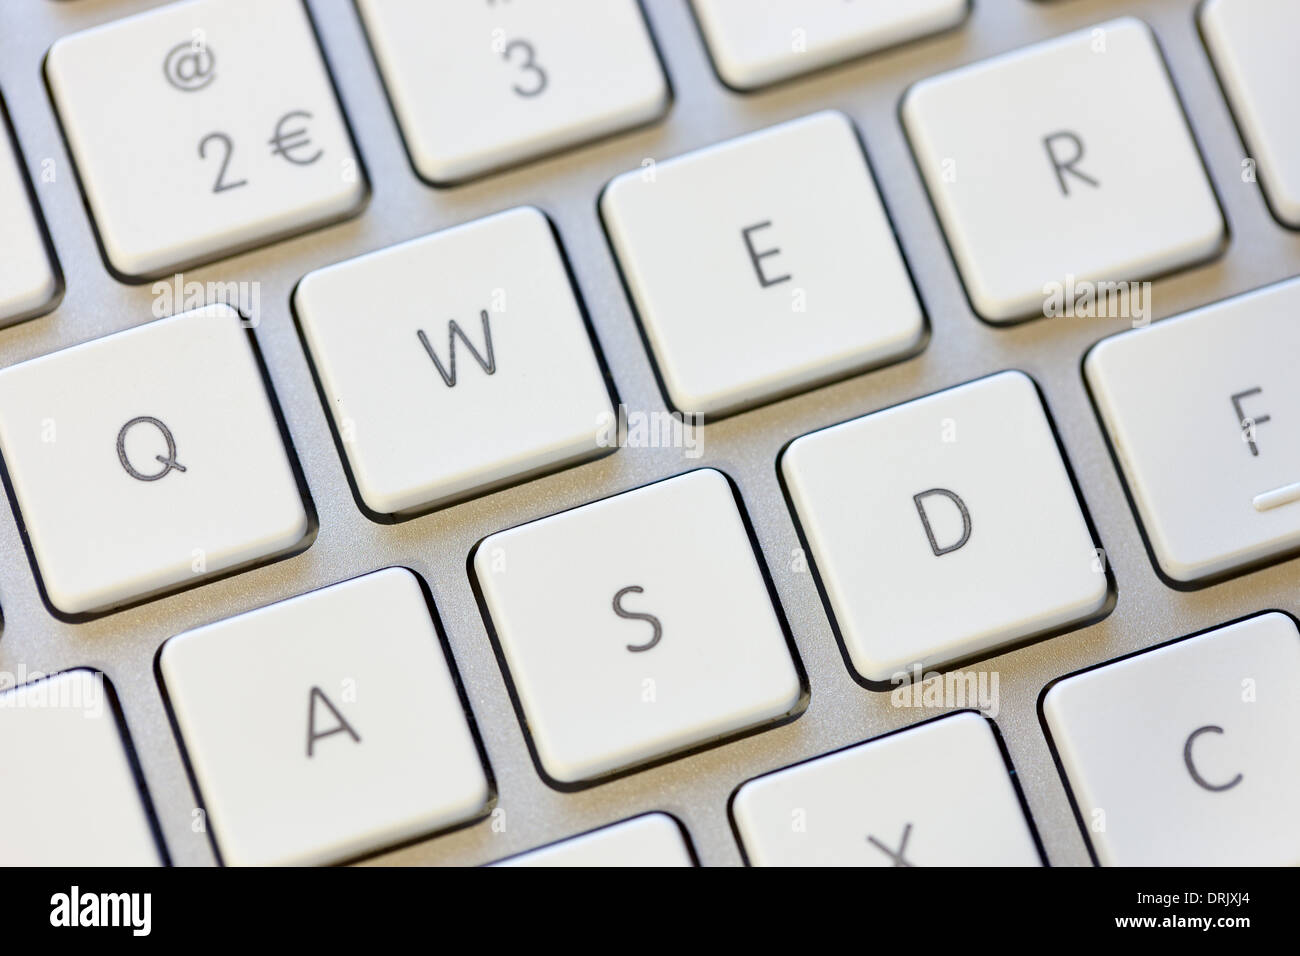 QWERTY is a certain typewriter or computer keyboard layout that is commonly used in some English-speaking countries. Stock Photo